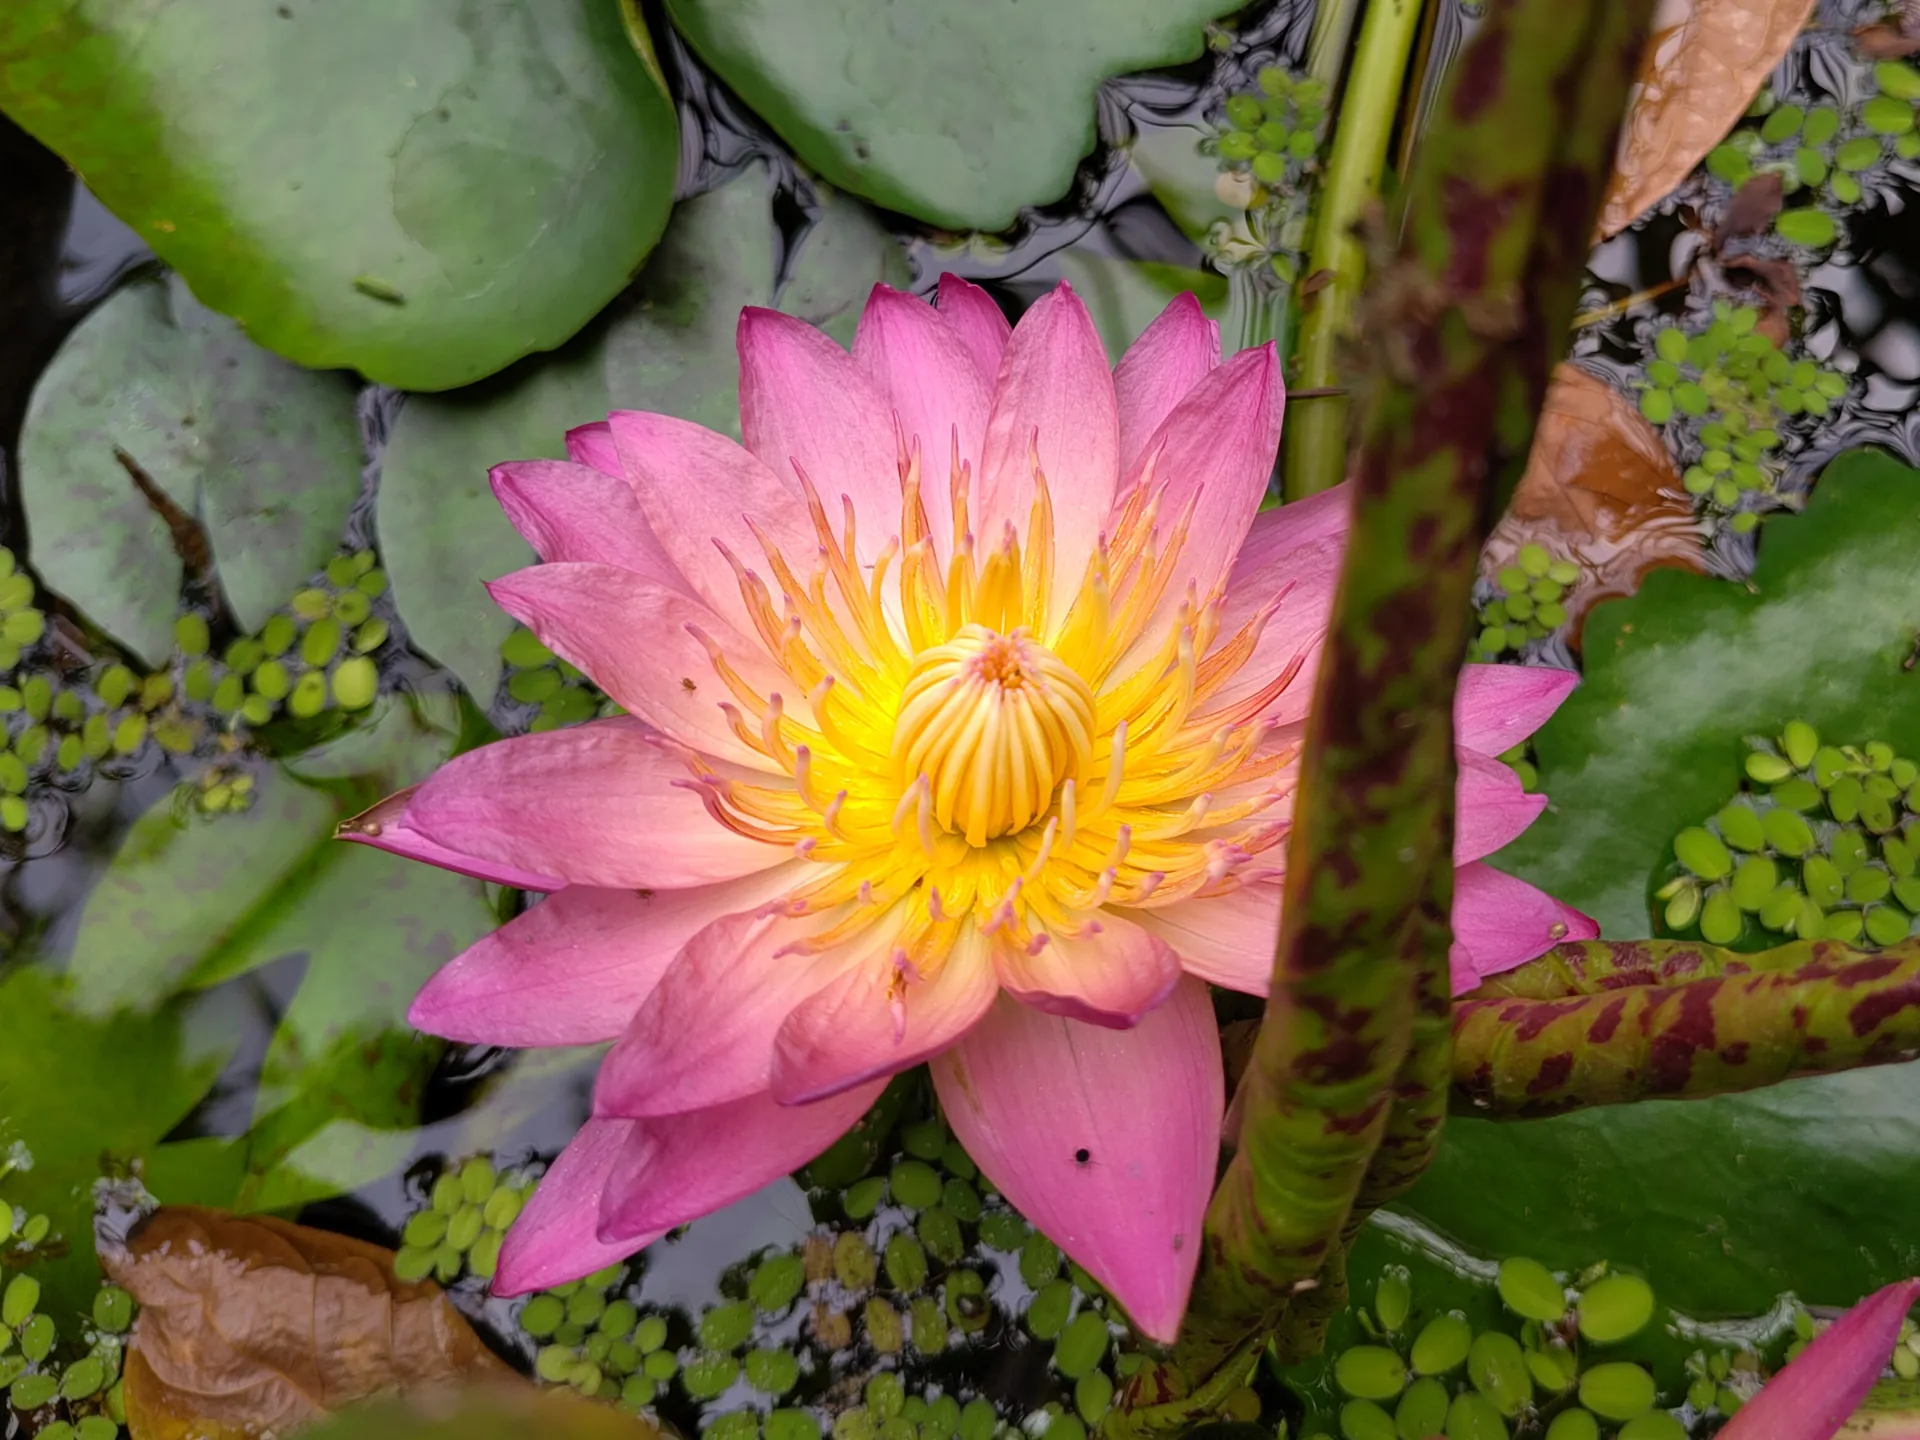 A water lily with a yellow center that fades over orange to pink on the edges of the petals.